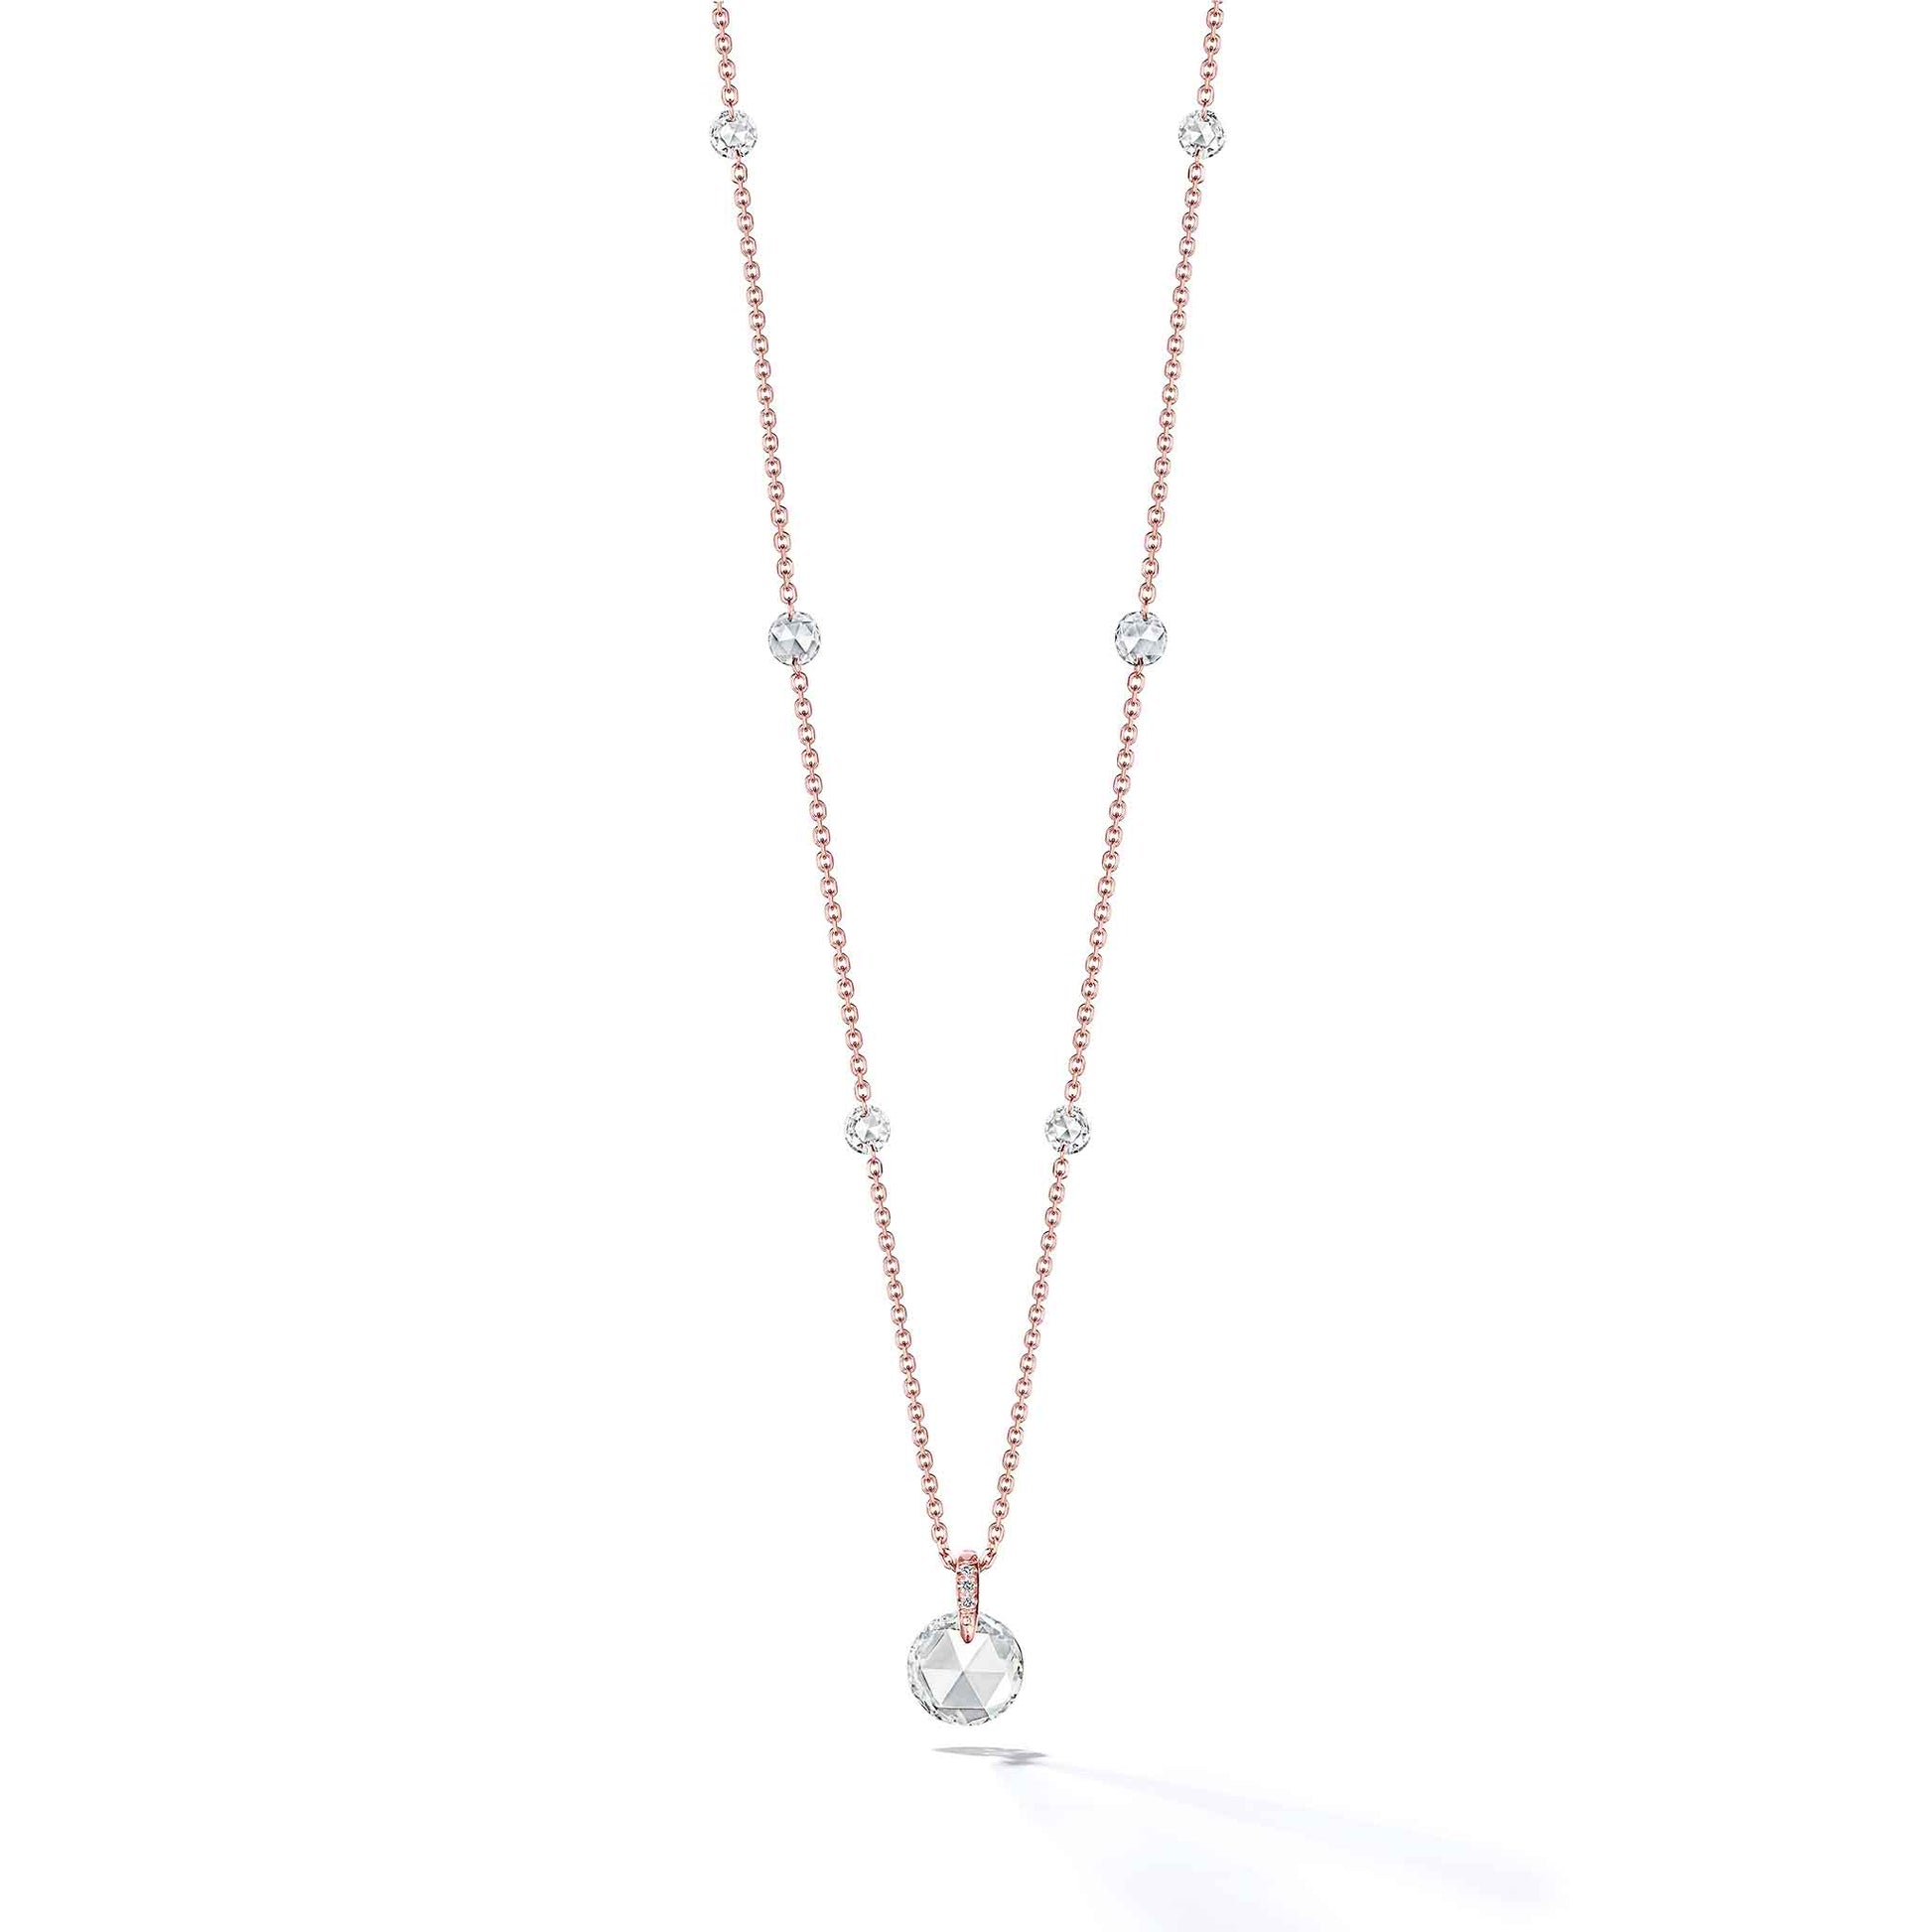 Rosette Rose Cut Diamond Necklace with a large drop center and Mimi So